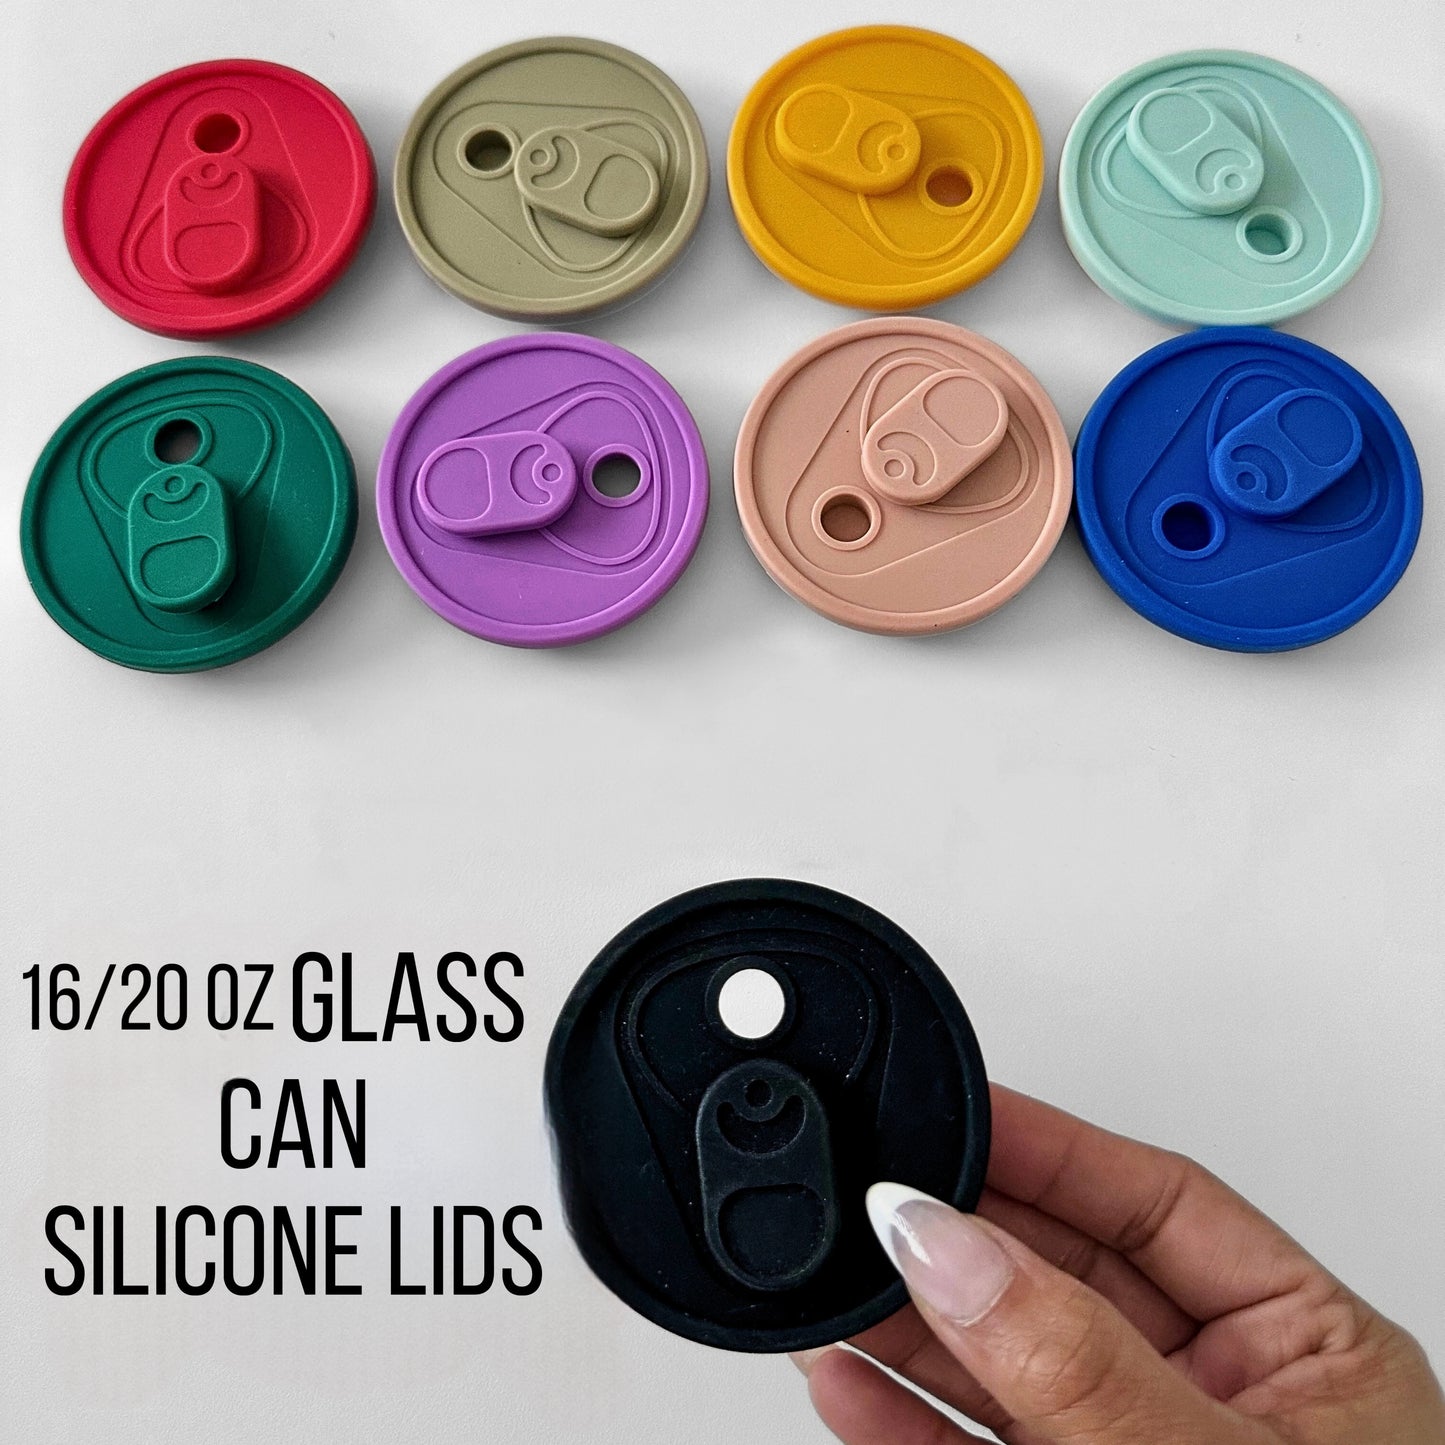 Silicone Lids for 16/20oz Glass Cans